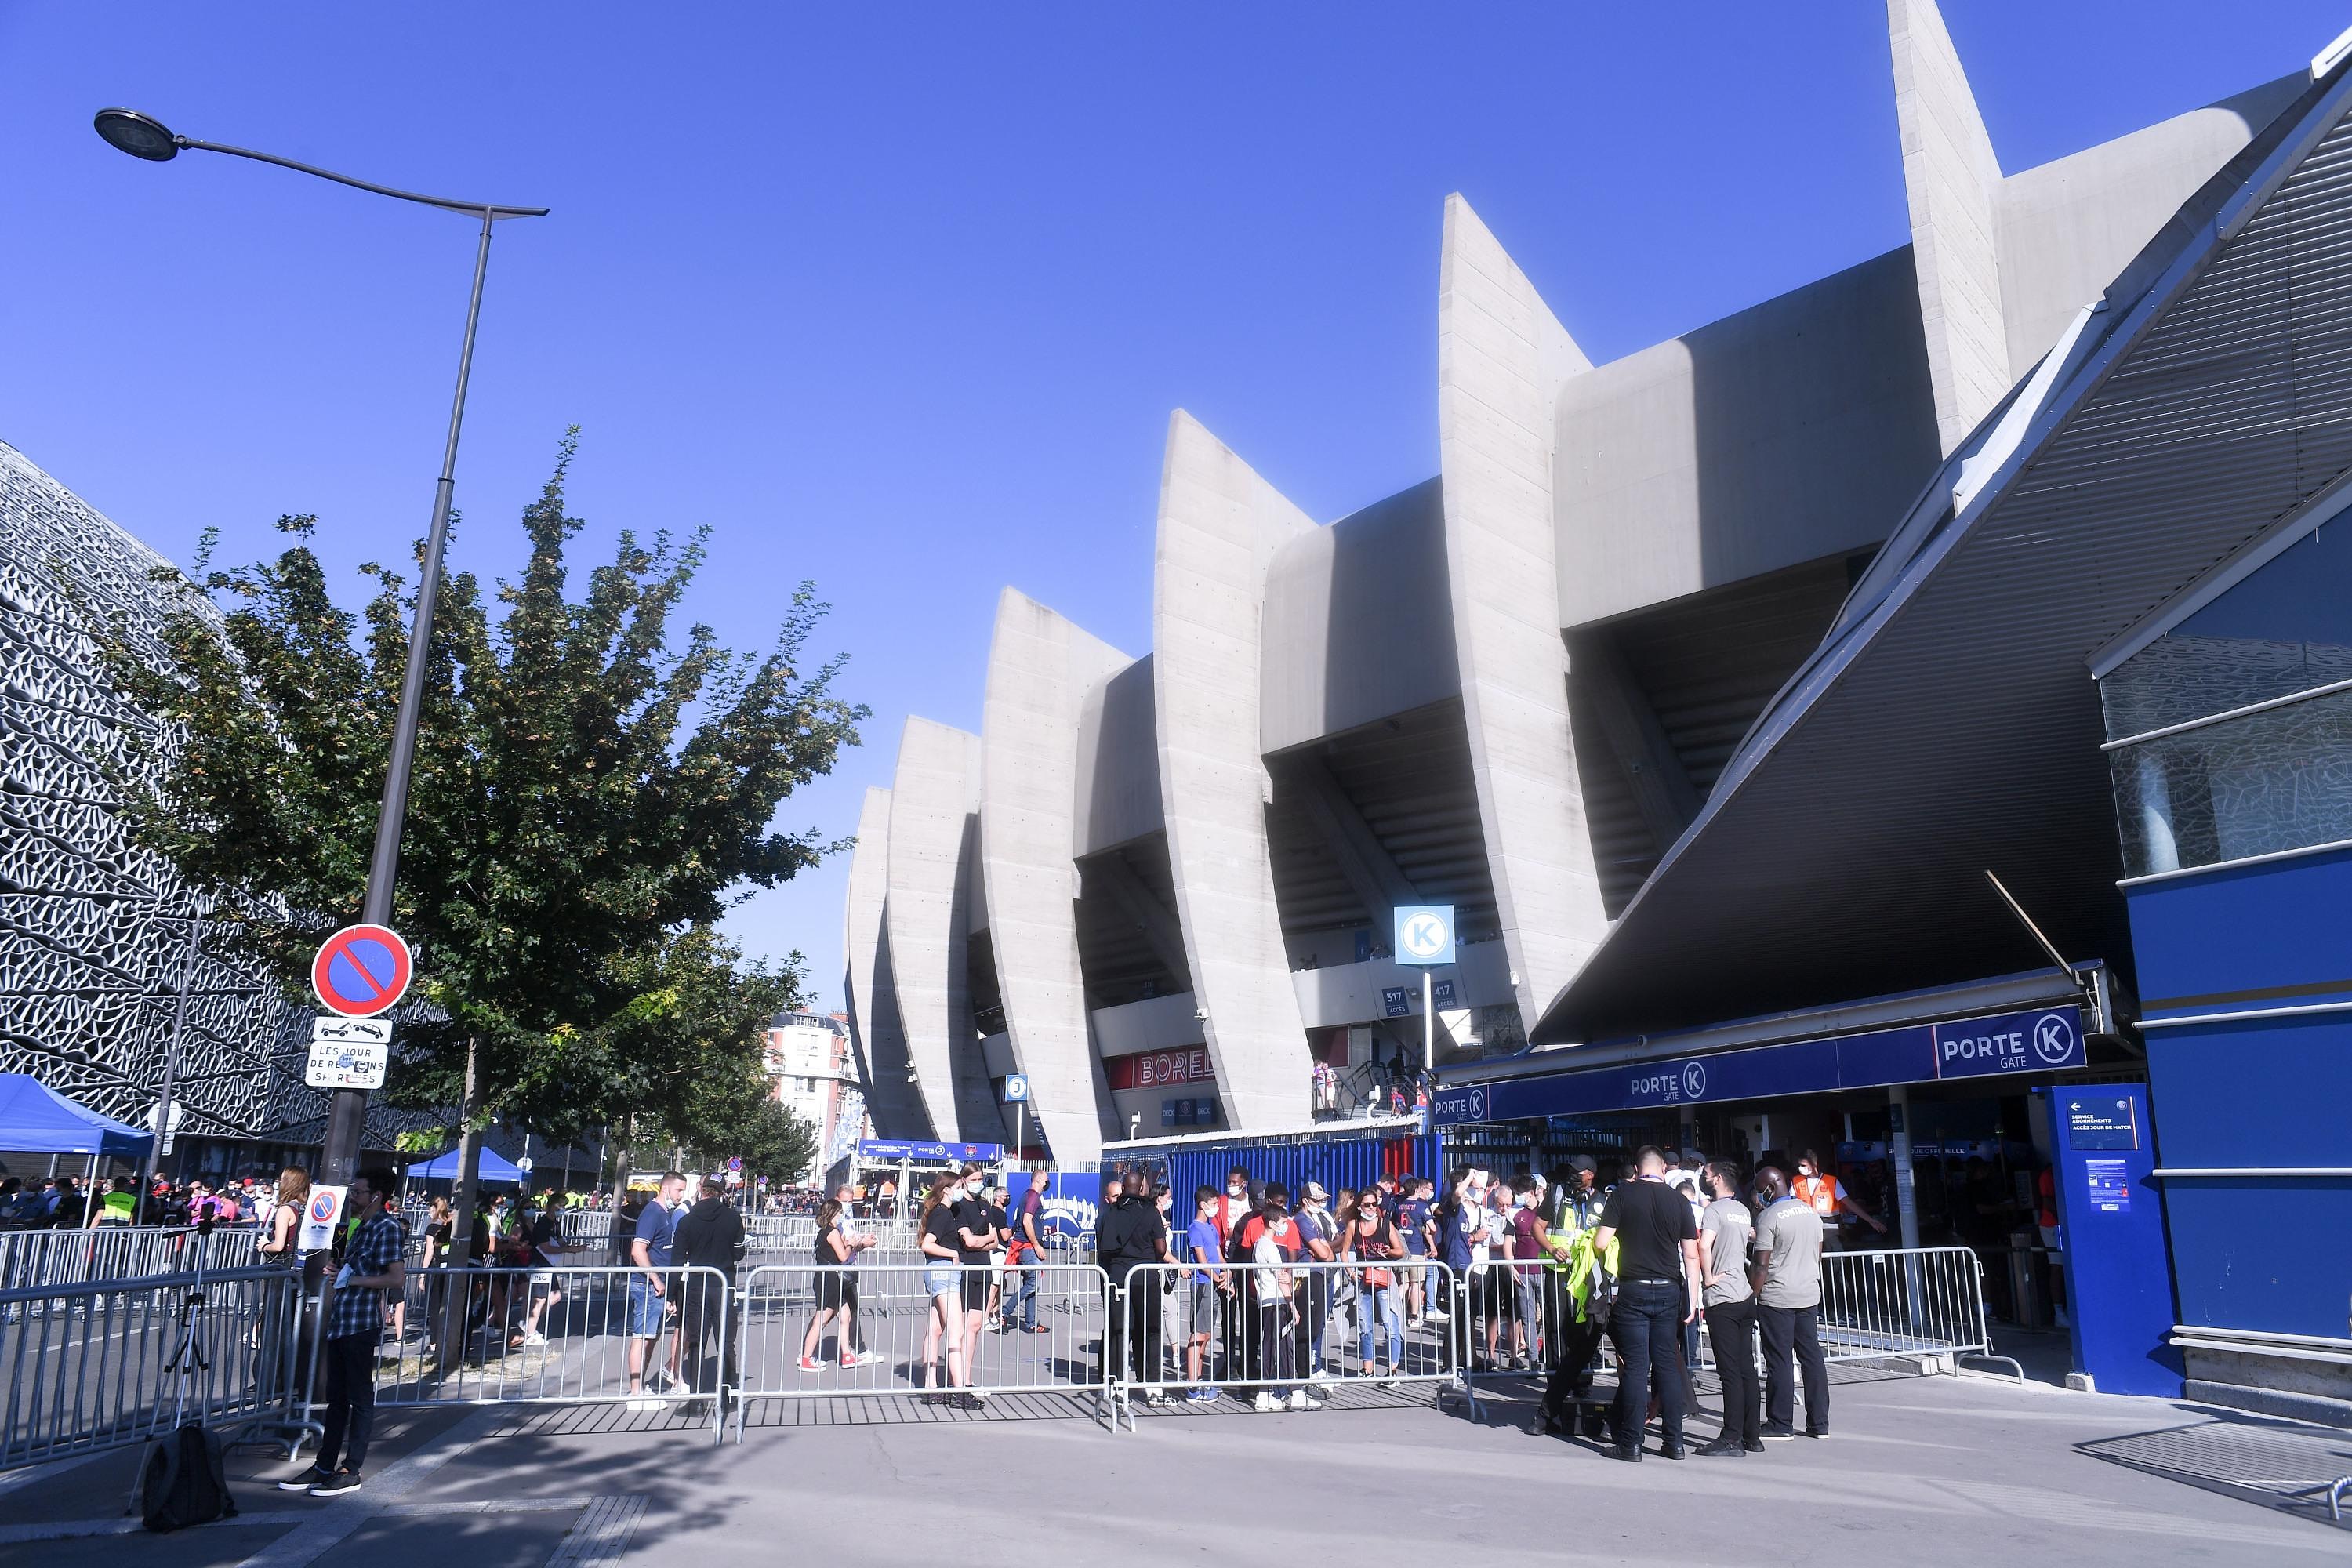 PSG-Real Sociedad: the Spanish club recommends to its fans not to take metro line 10